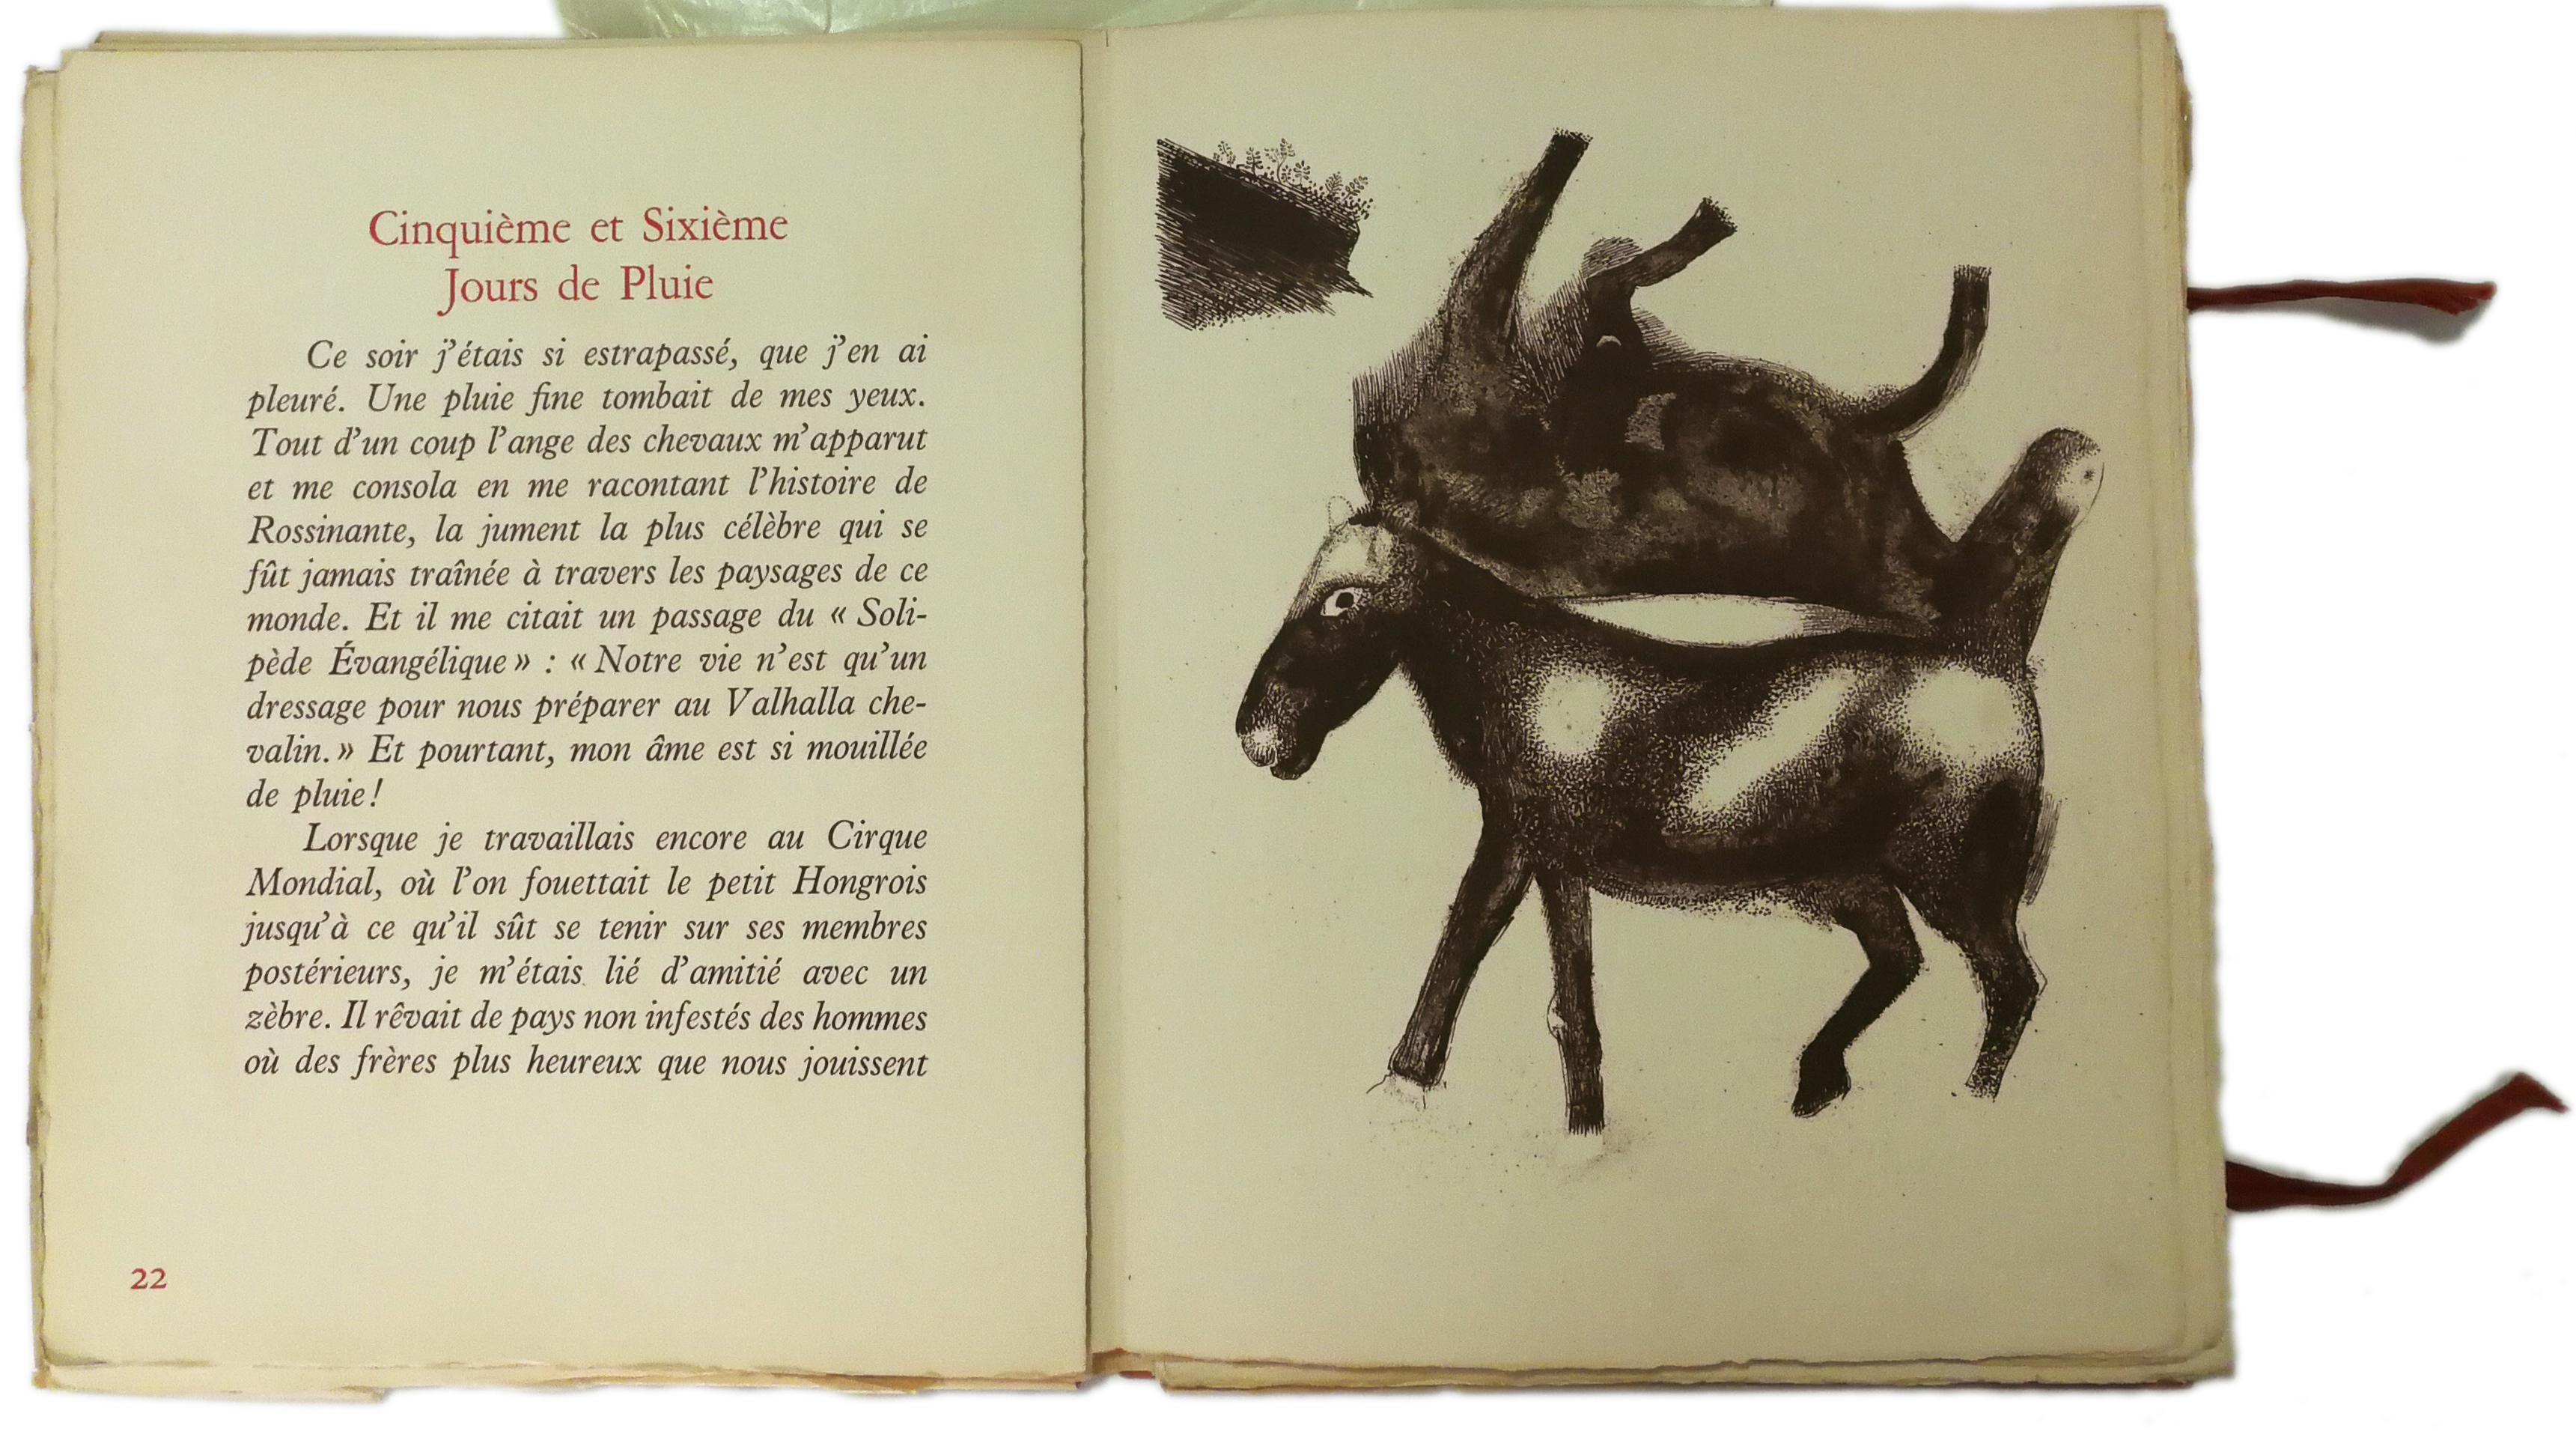 Journal d'un Cheval - Original Artist Book by C. Goll, illustrated by M. Chagall 1